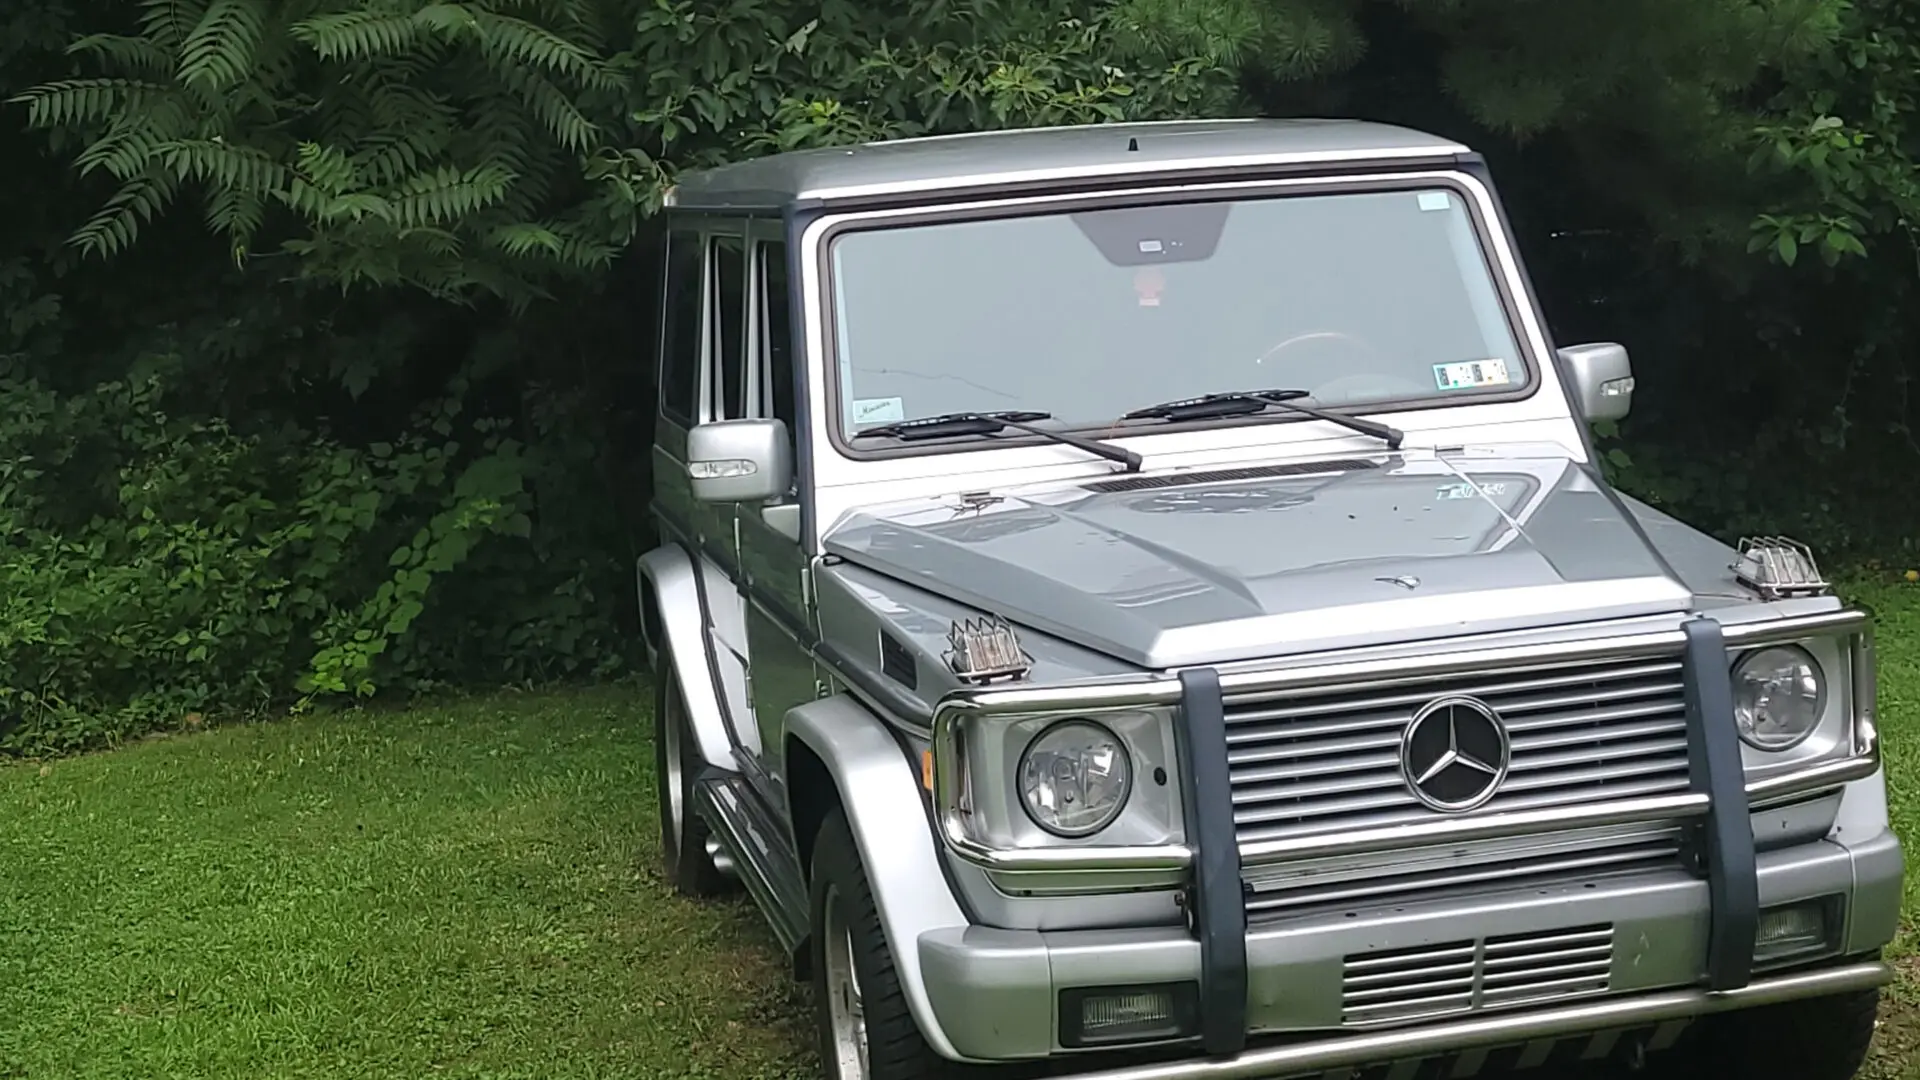 A silver mercedes benz parked in the grass.